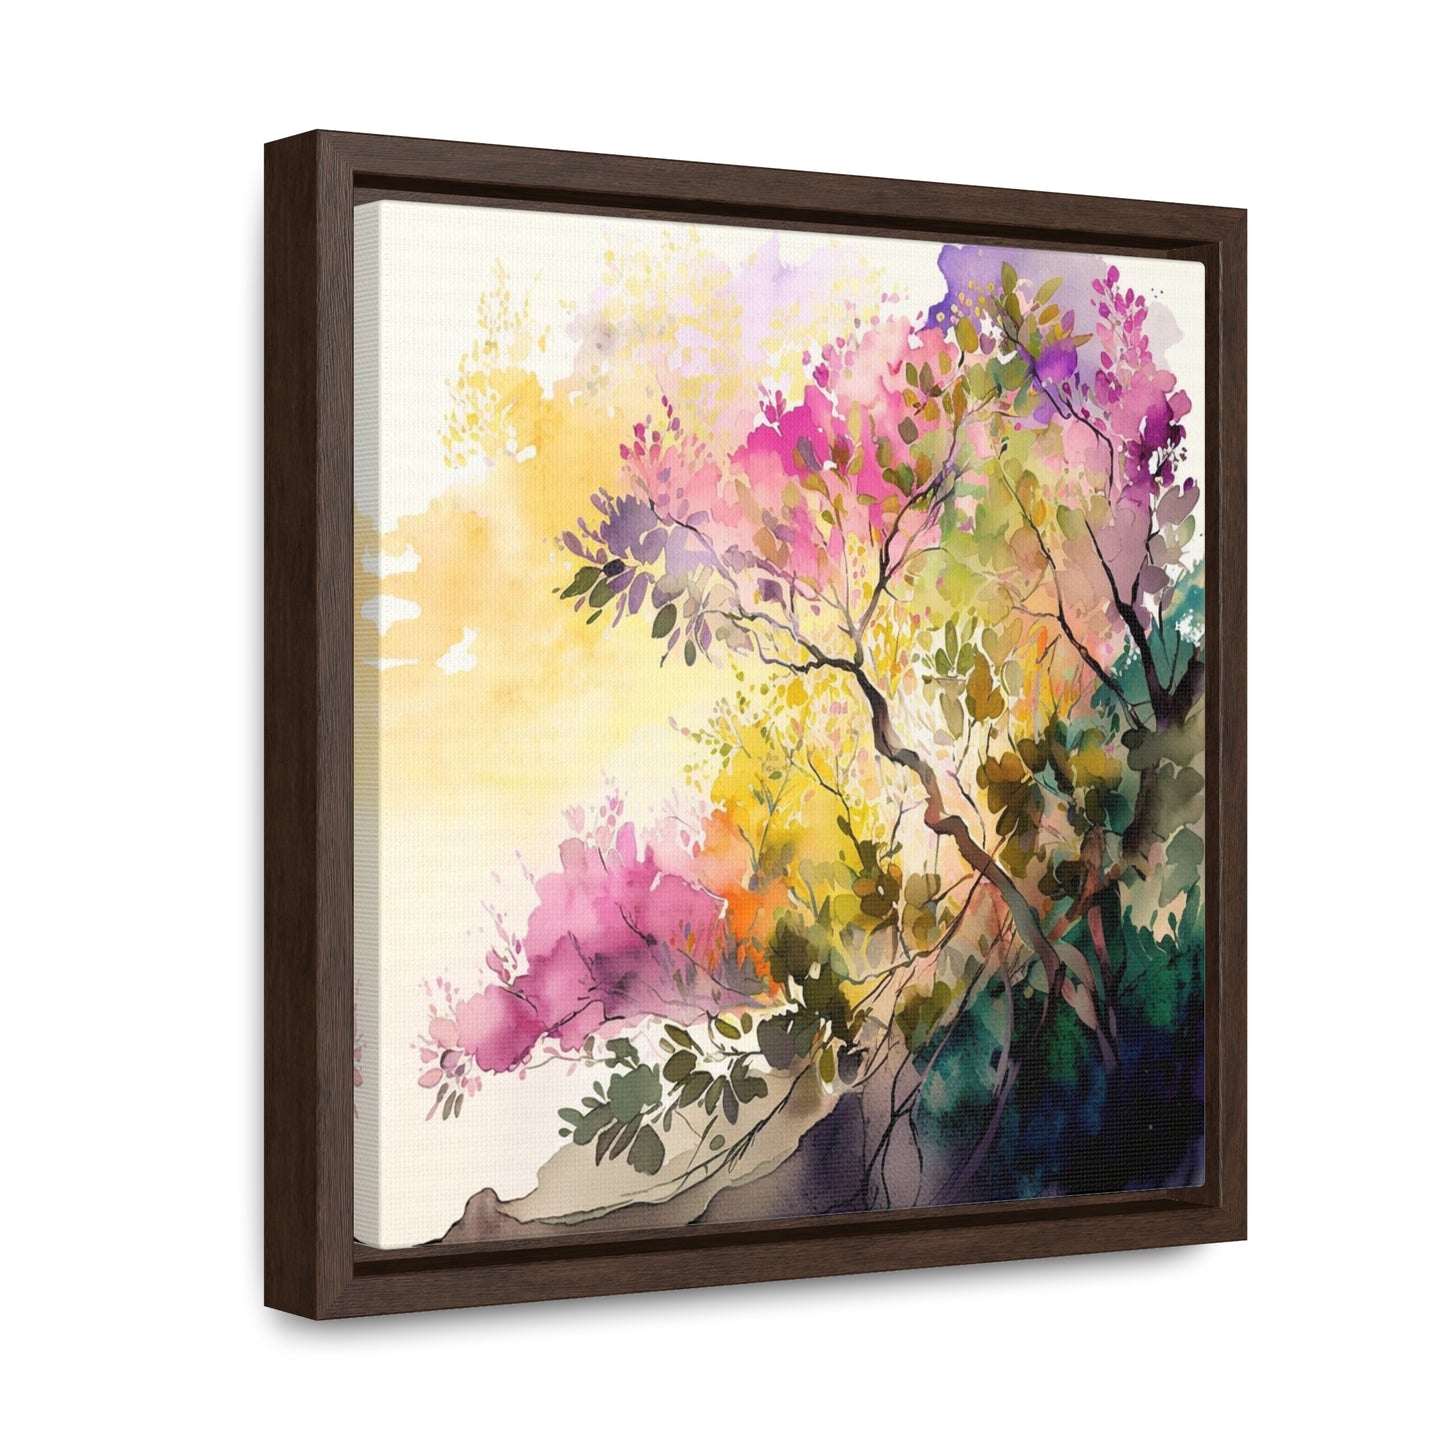 Gallery Canvas Wraps, Square Frame Mother Nature Bright Spring Colors Realistic Watercolor 2